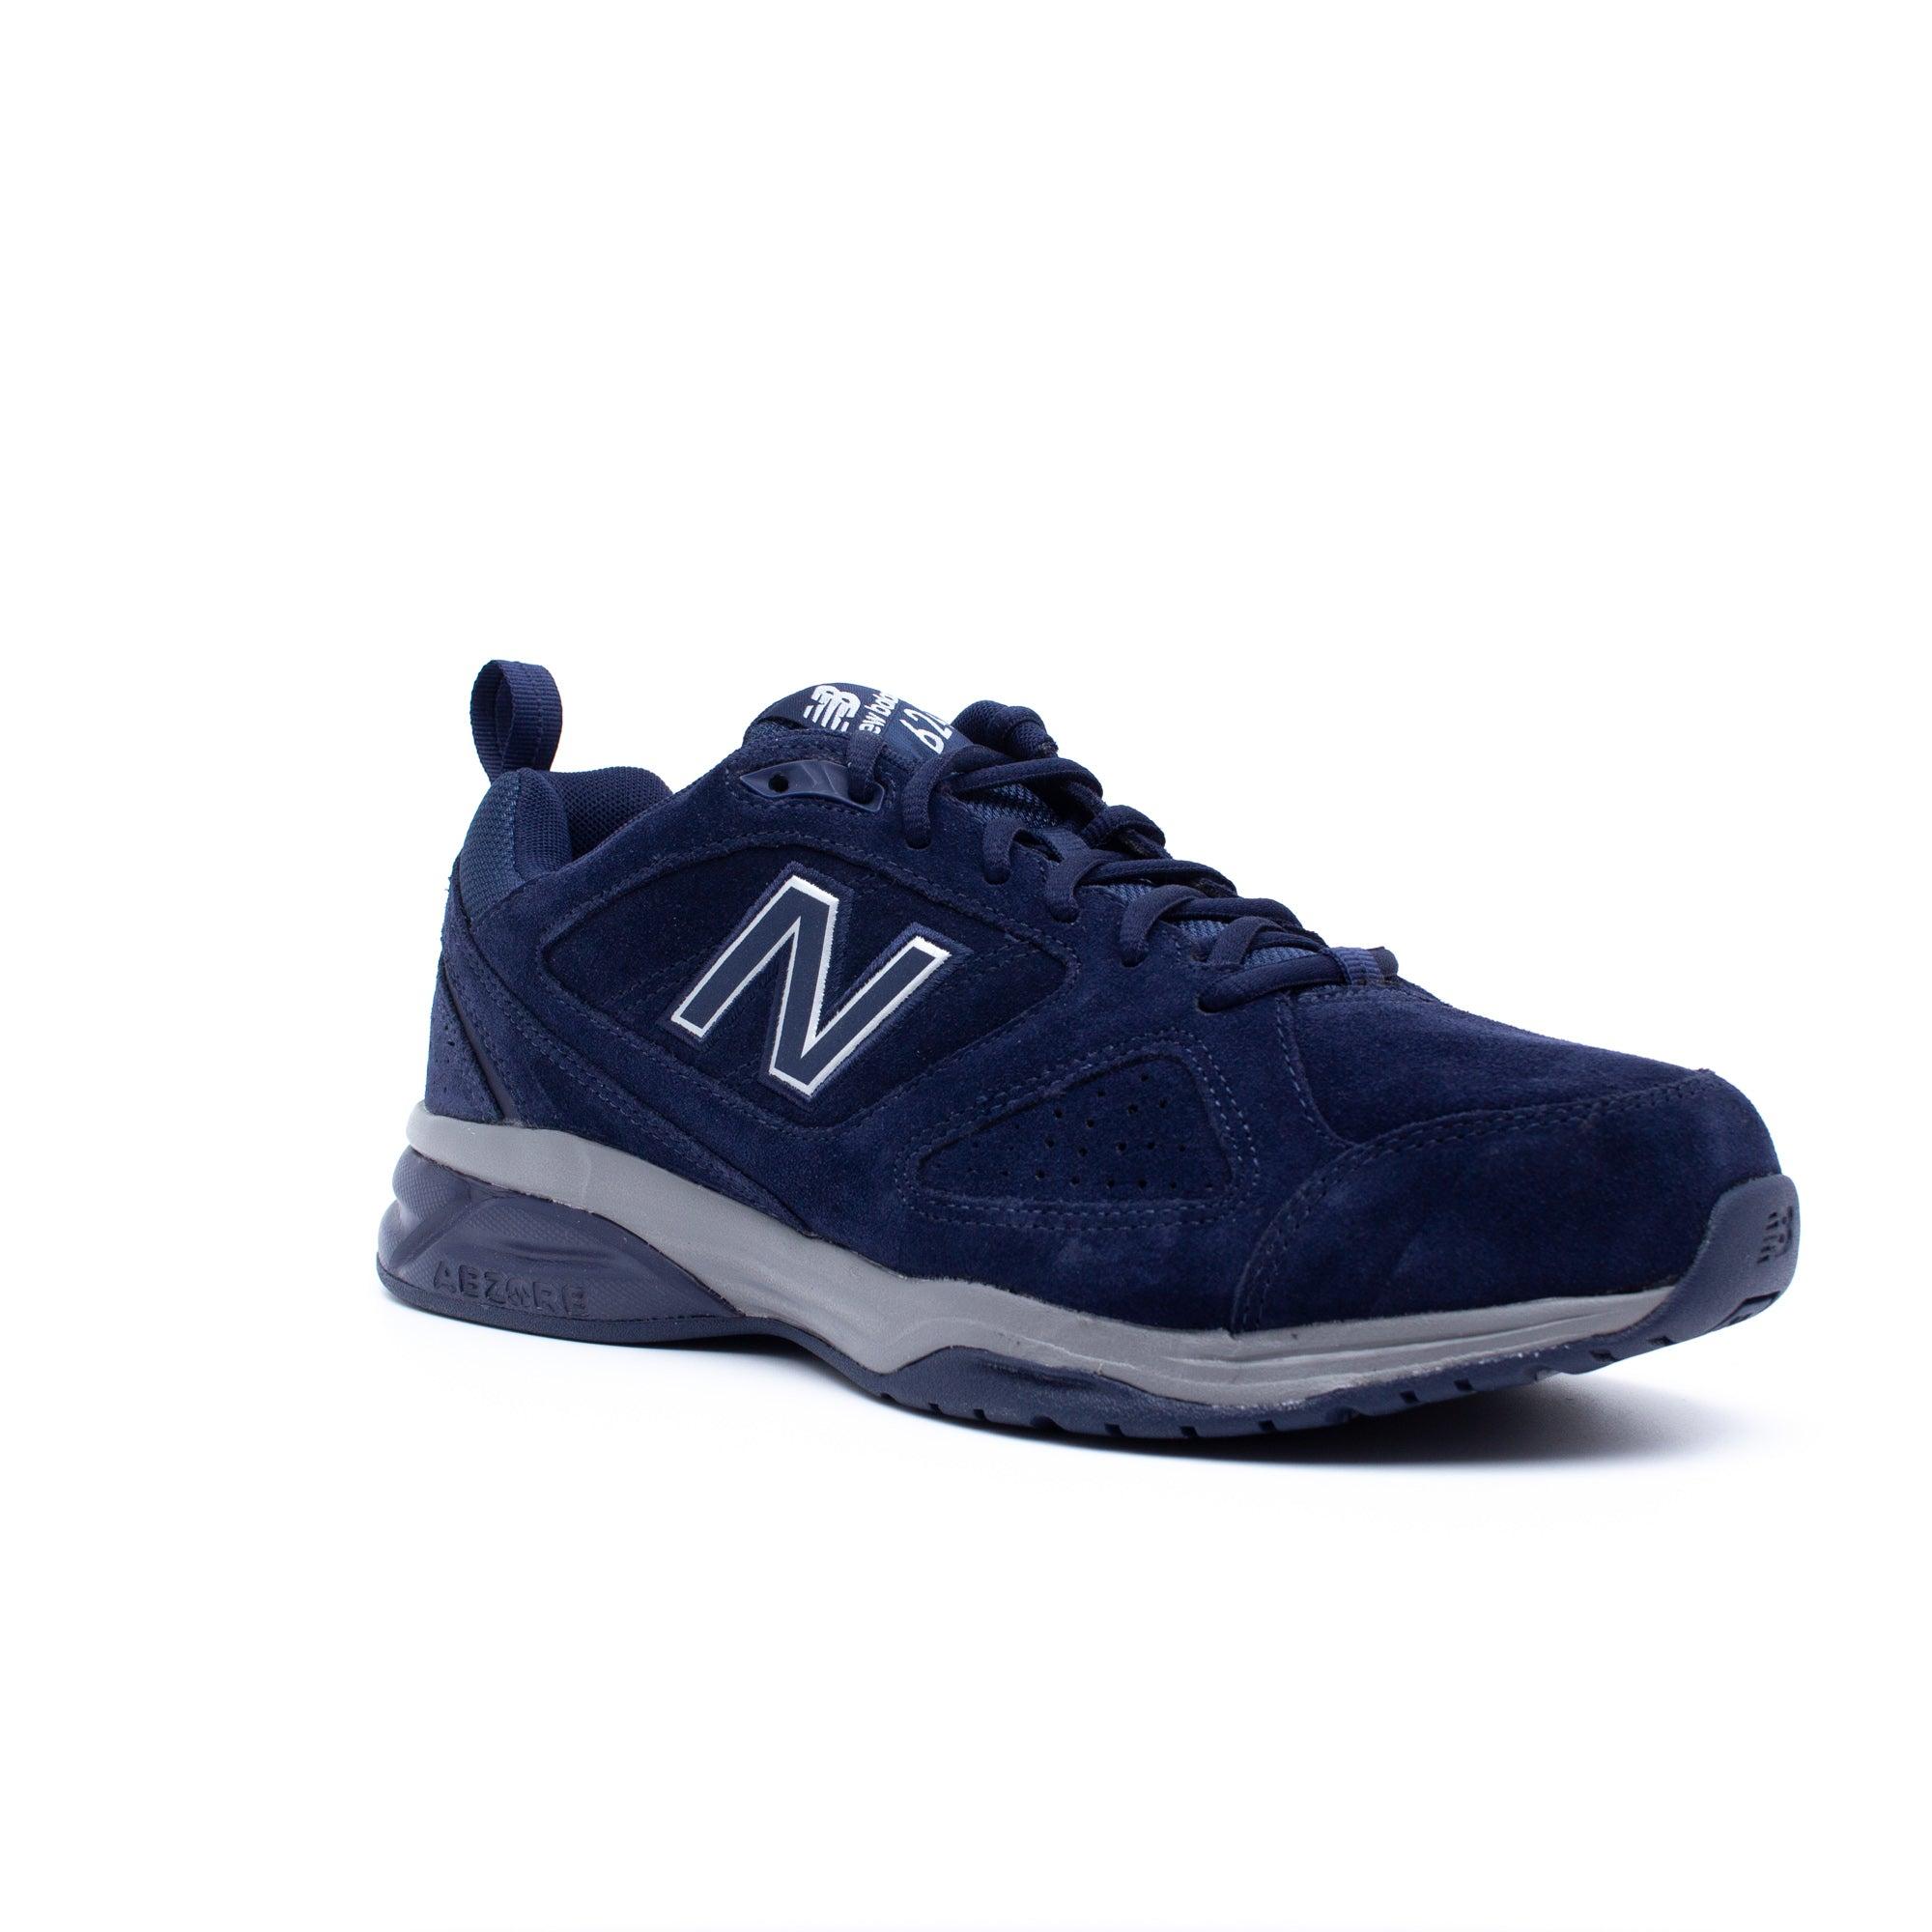 New Balance S Wide Fit Mx624nv4 Trainers Abzorb in Blue | Lyst